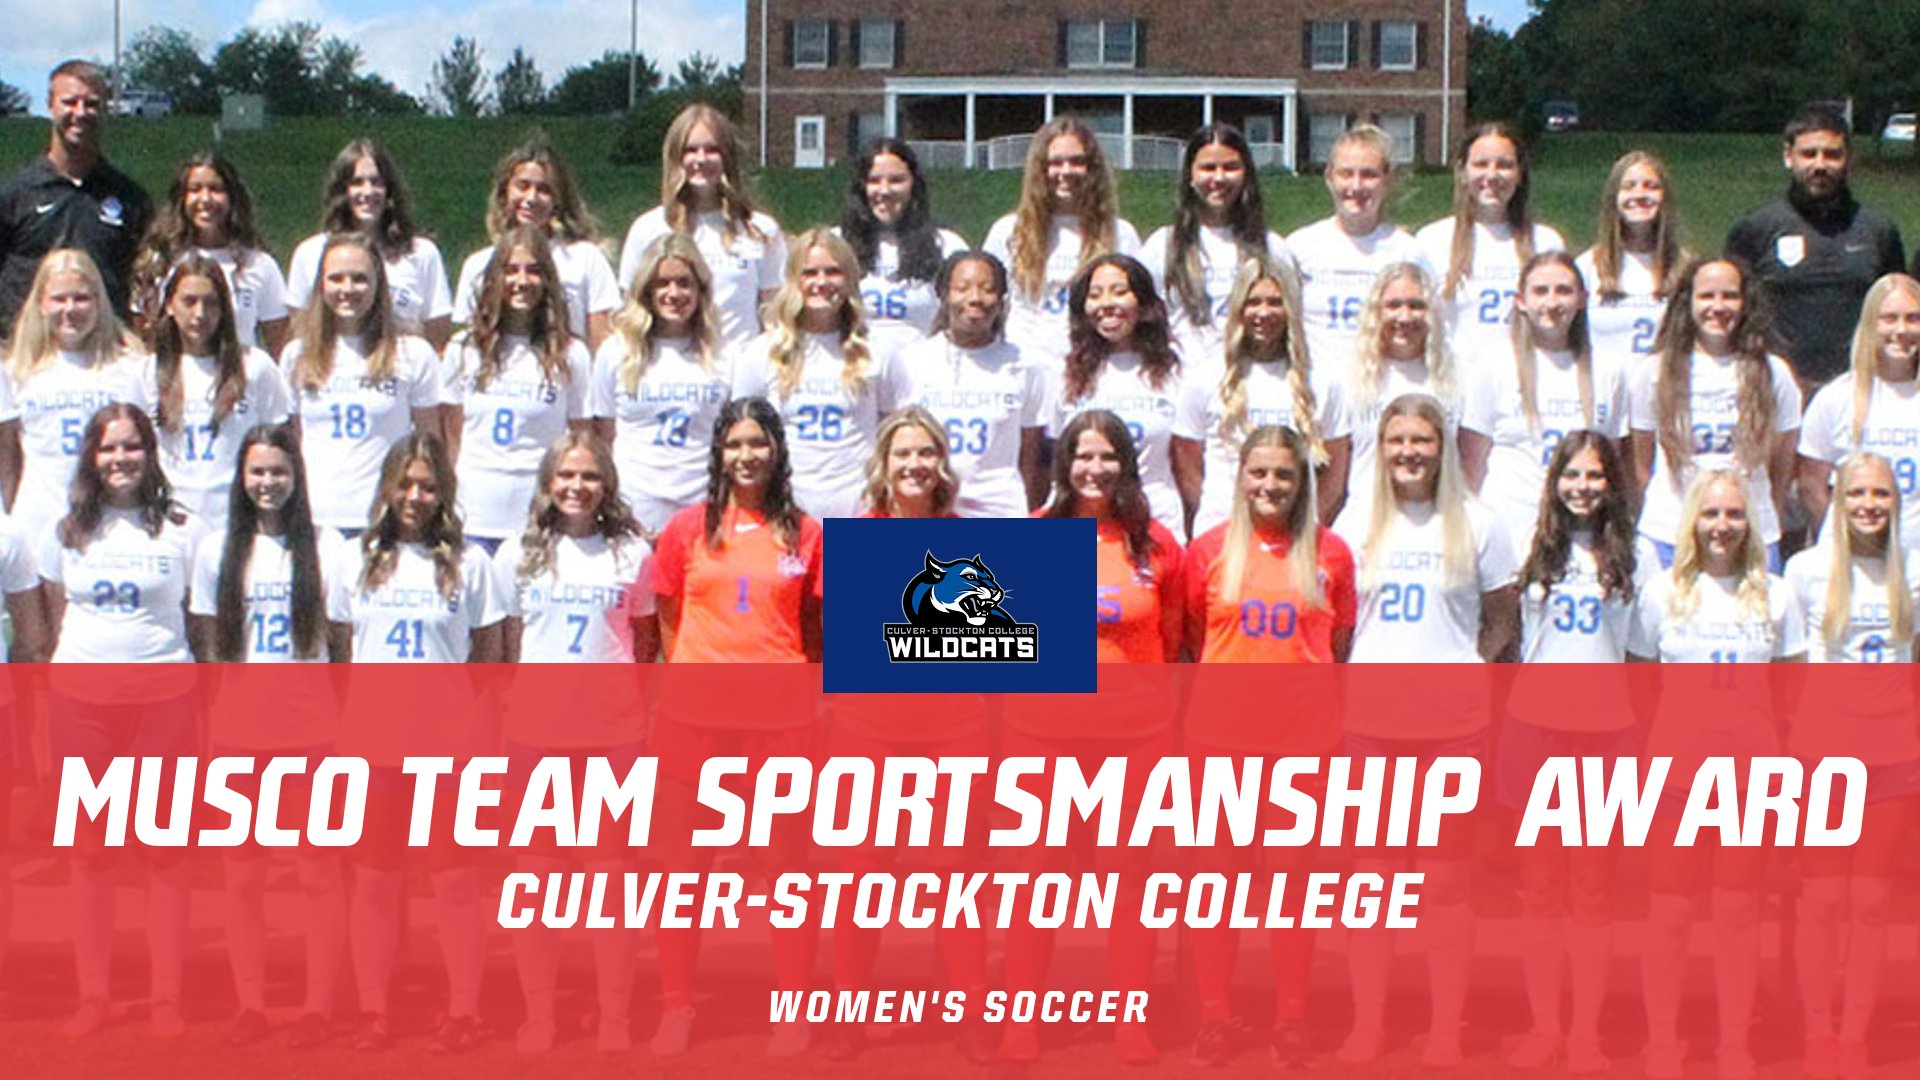 For the Second-Straight Year, Culver-Stockton College Earns Musco Team Sportsmanship Award